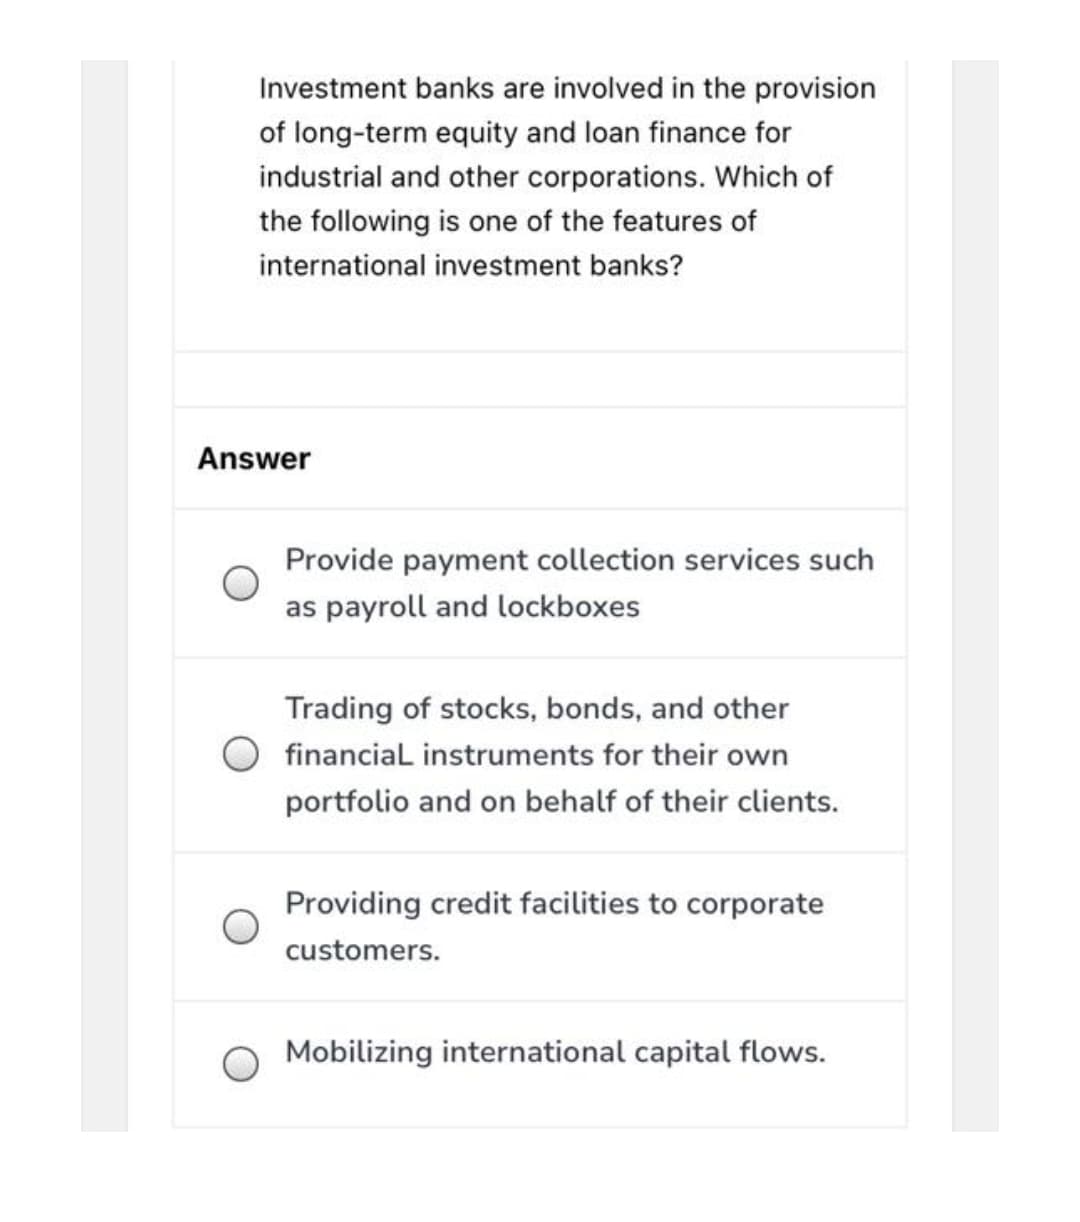 Investment banks are involved in the provision
of long-term equity and loan finance for
industrial and other corporations. Which of
the following is one of the features of
international investment banks?
Answer
Provide payment collection services such
as payroll and lockboxes
Trading of stocks, bonds, and other
financial instruments for their own
portfolio and on behalf of their clients.
Providing credit facilities to corporate
customers.
Mobilizing international capital flows.
